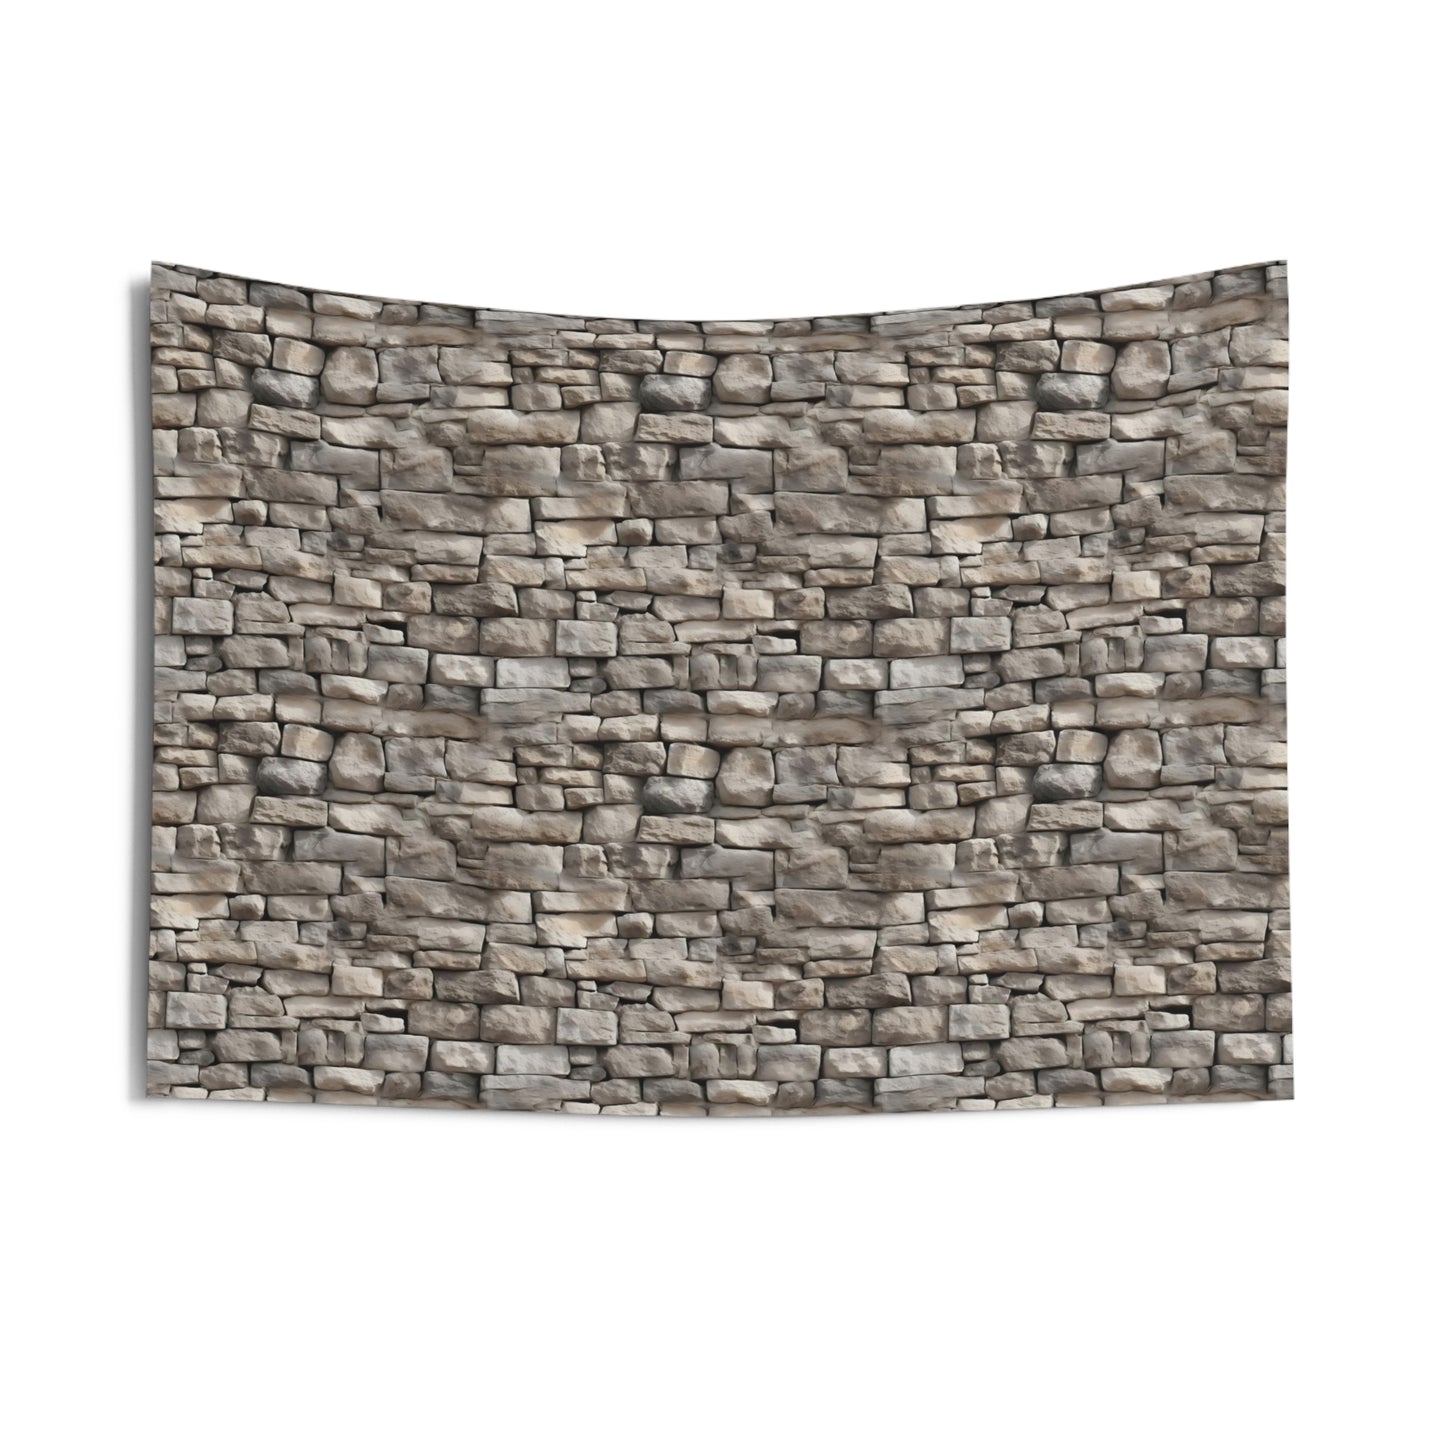 Stone Brick Wall Tapestry, Faux Art Hanging Cool Unique Landscape Vertical Aesthetic Large Small Decor Bedroom College Dorm Room Starcove Fashion